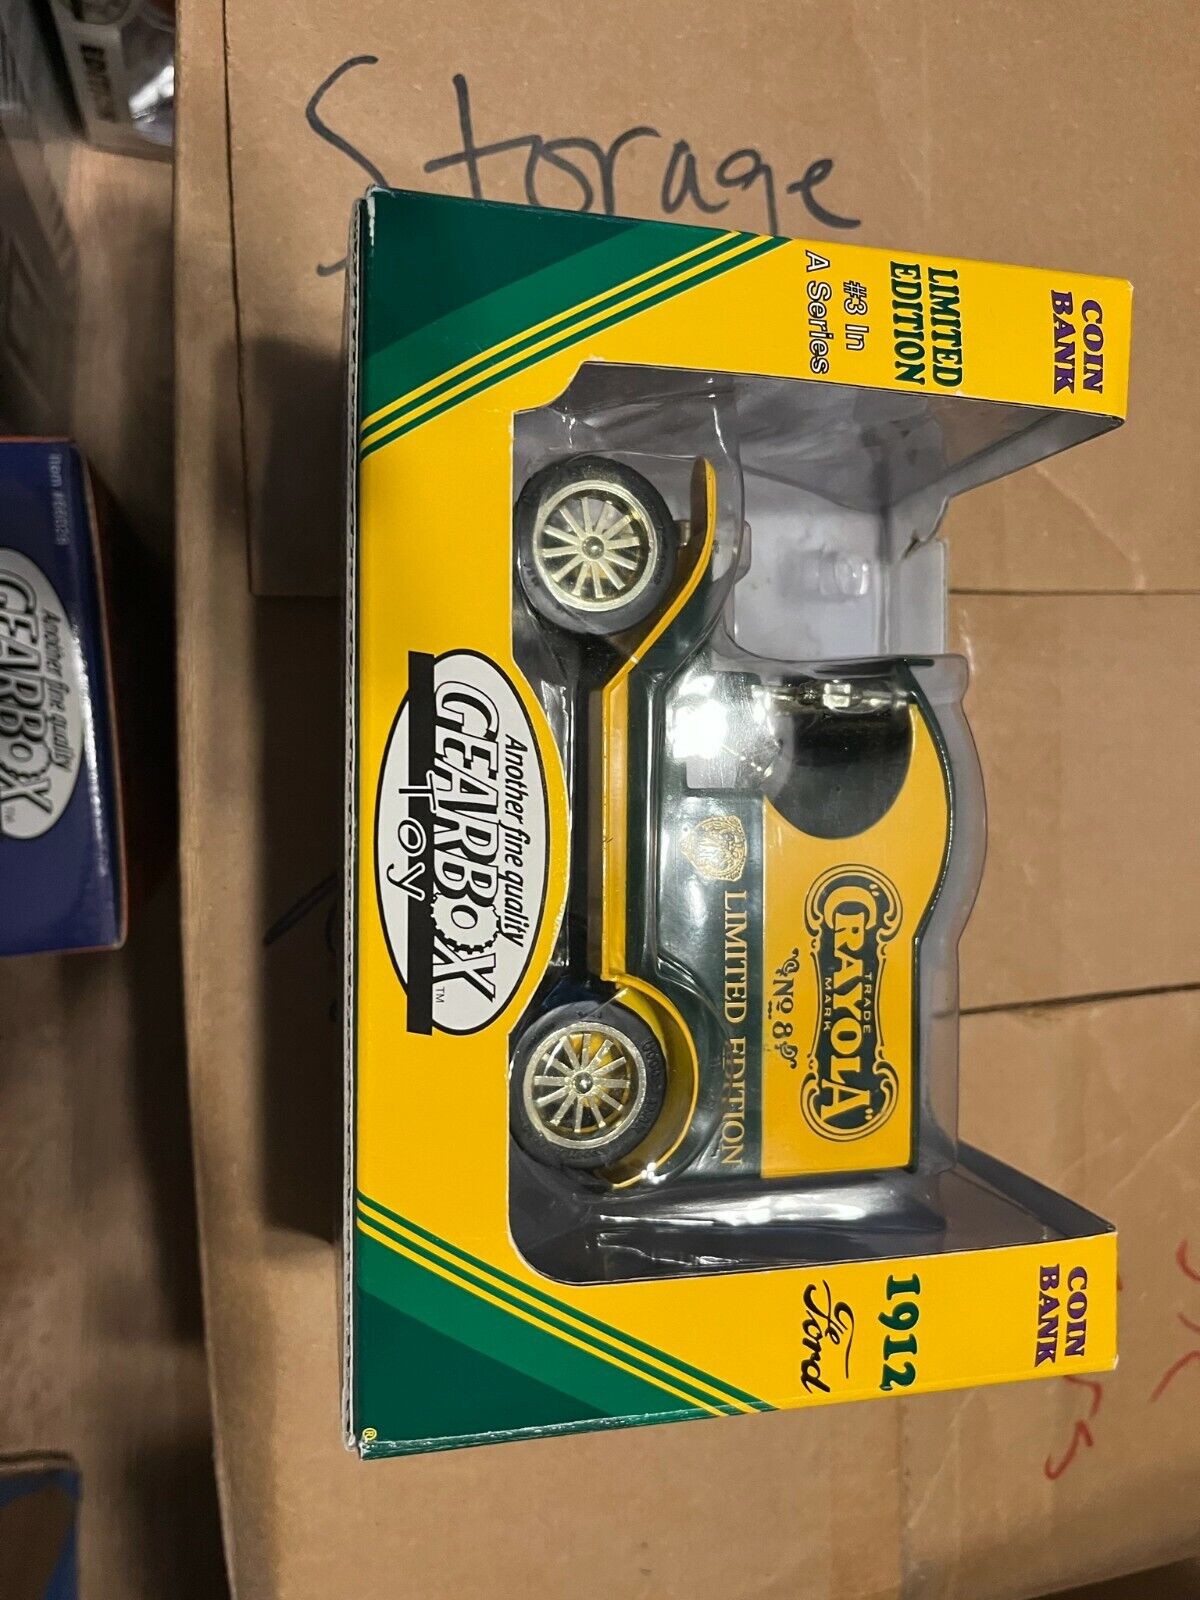 Limited Edition Crayola Gearbox 1912 Model. T Delivery Car Coin Bank